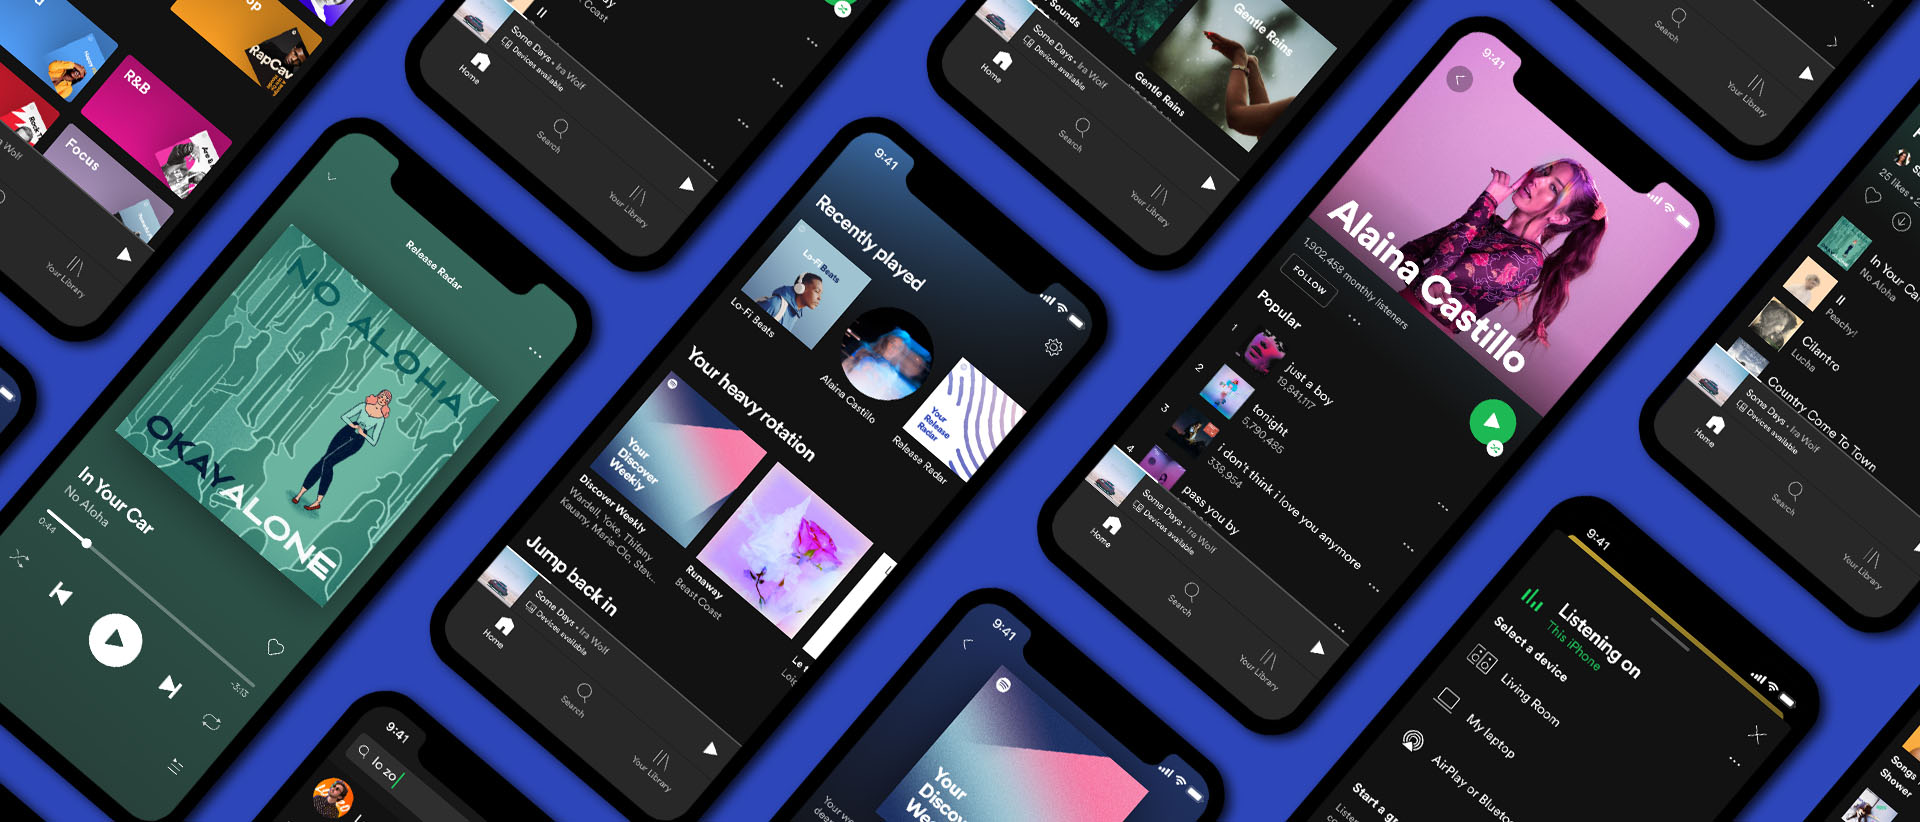 Spotify: Best Music Streaming app With awesome features